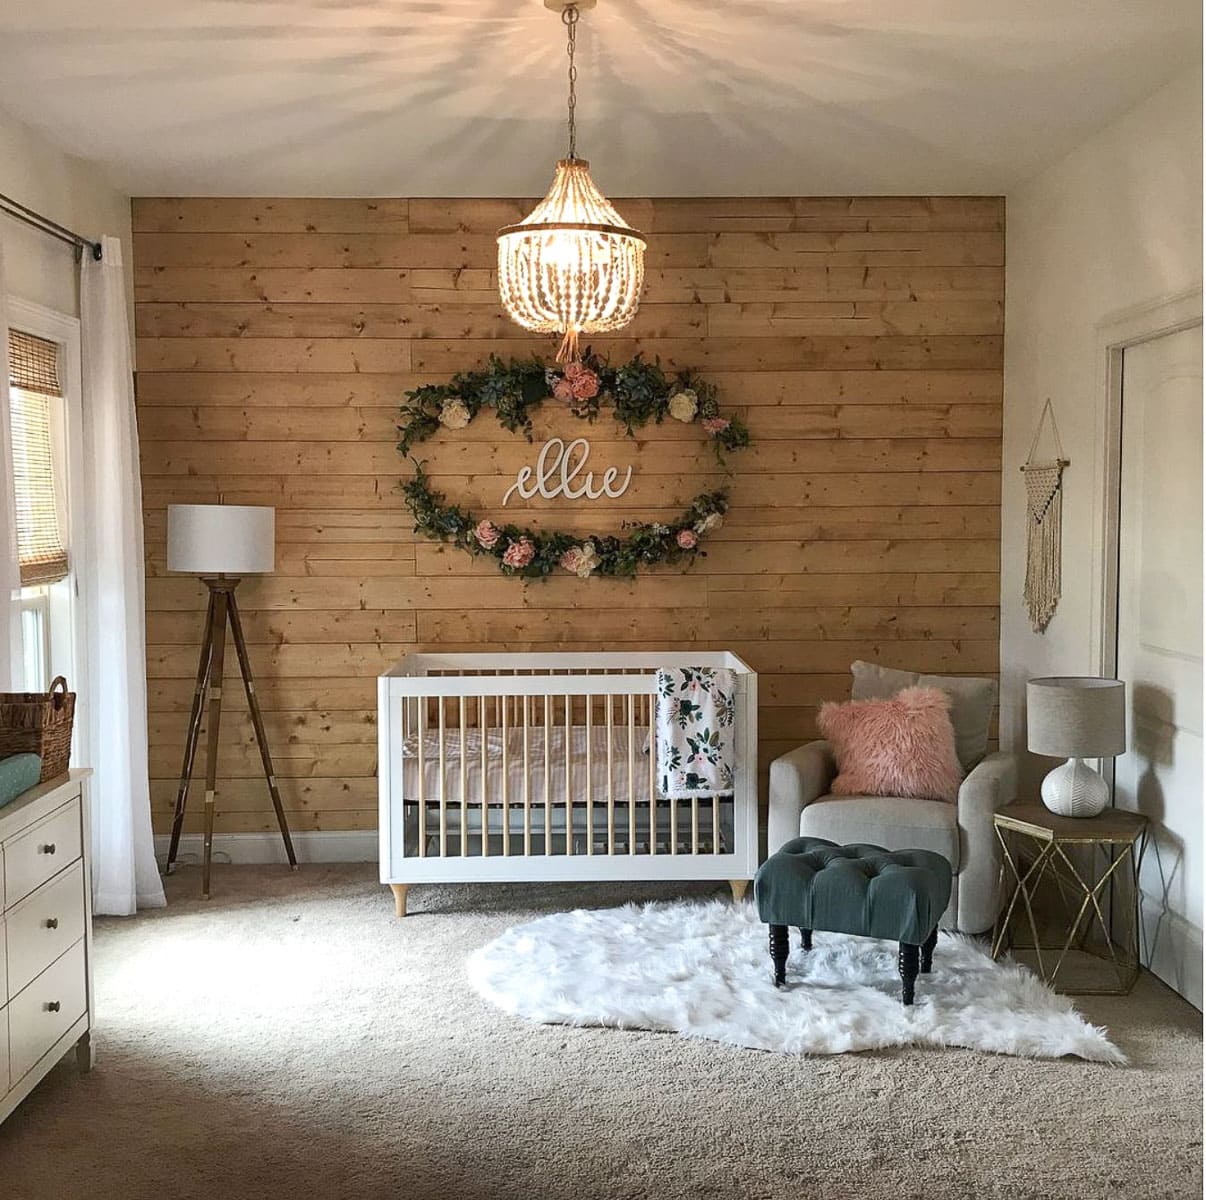 A farmhouse nursery for a baby girl with a rustic shiplap feature wall and floral baby name design.